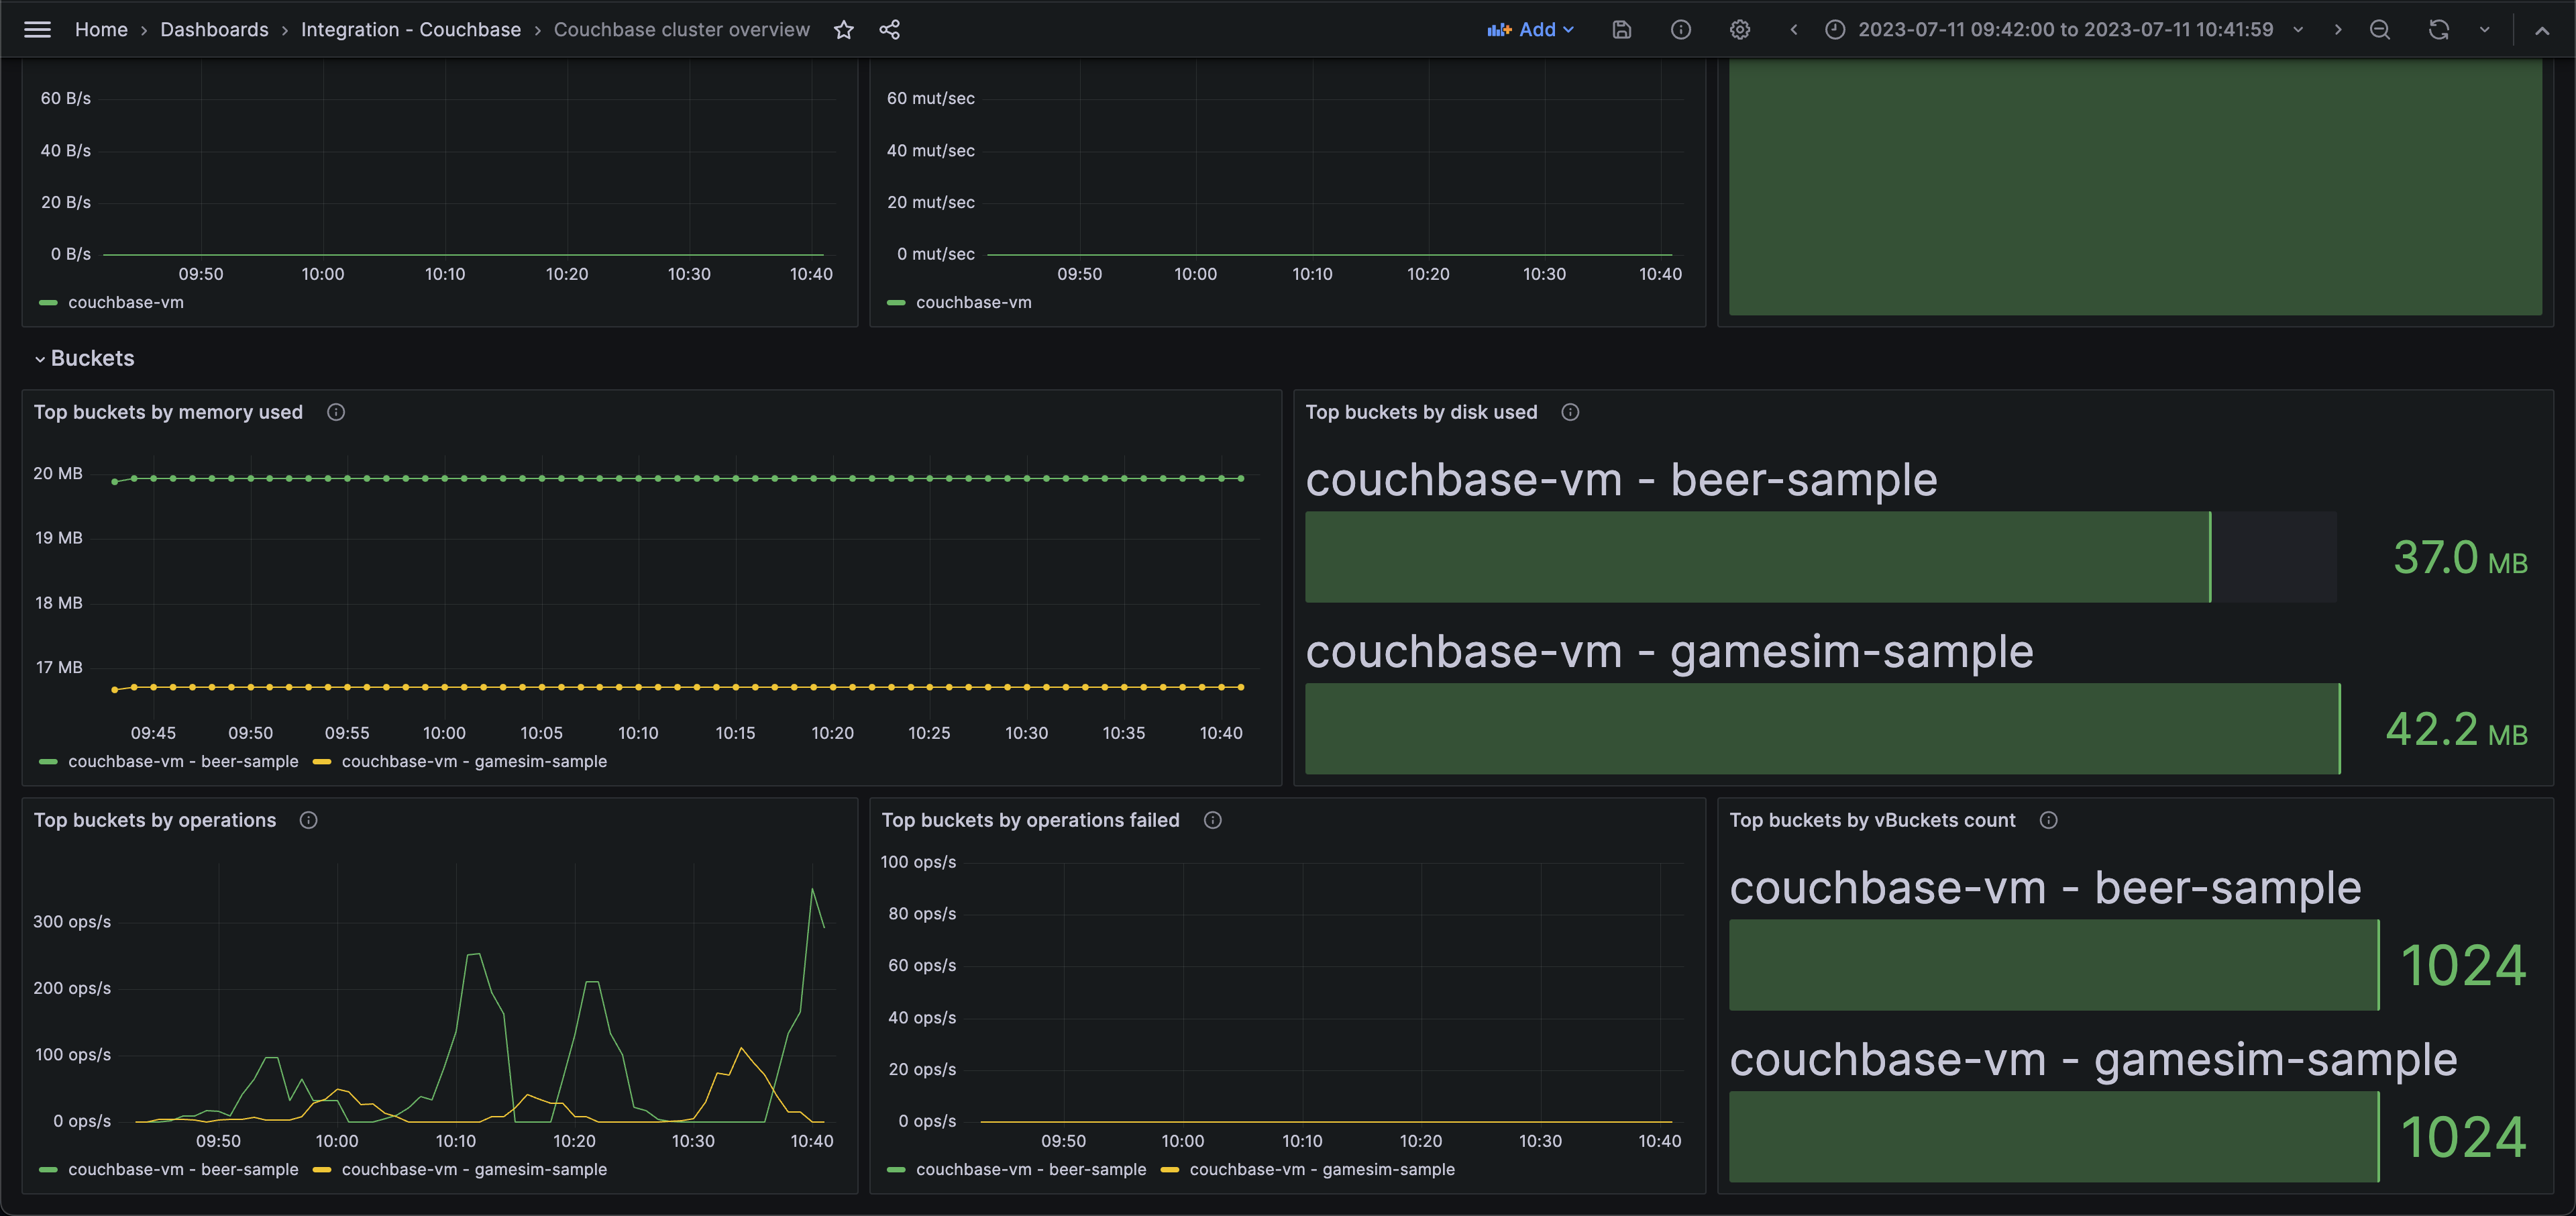 Couchbase cluster overview (top buckets)